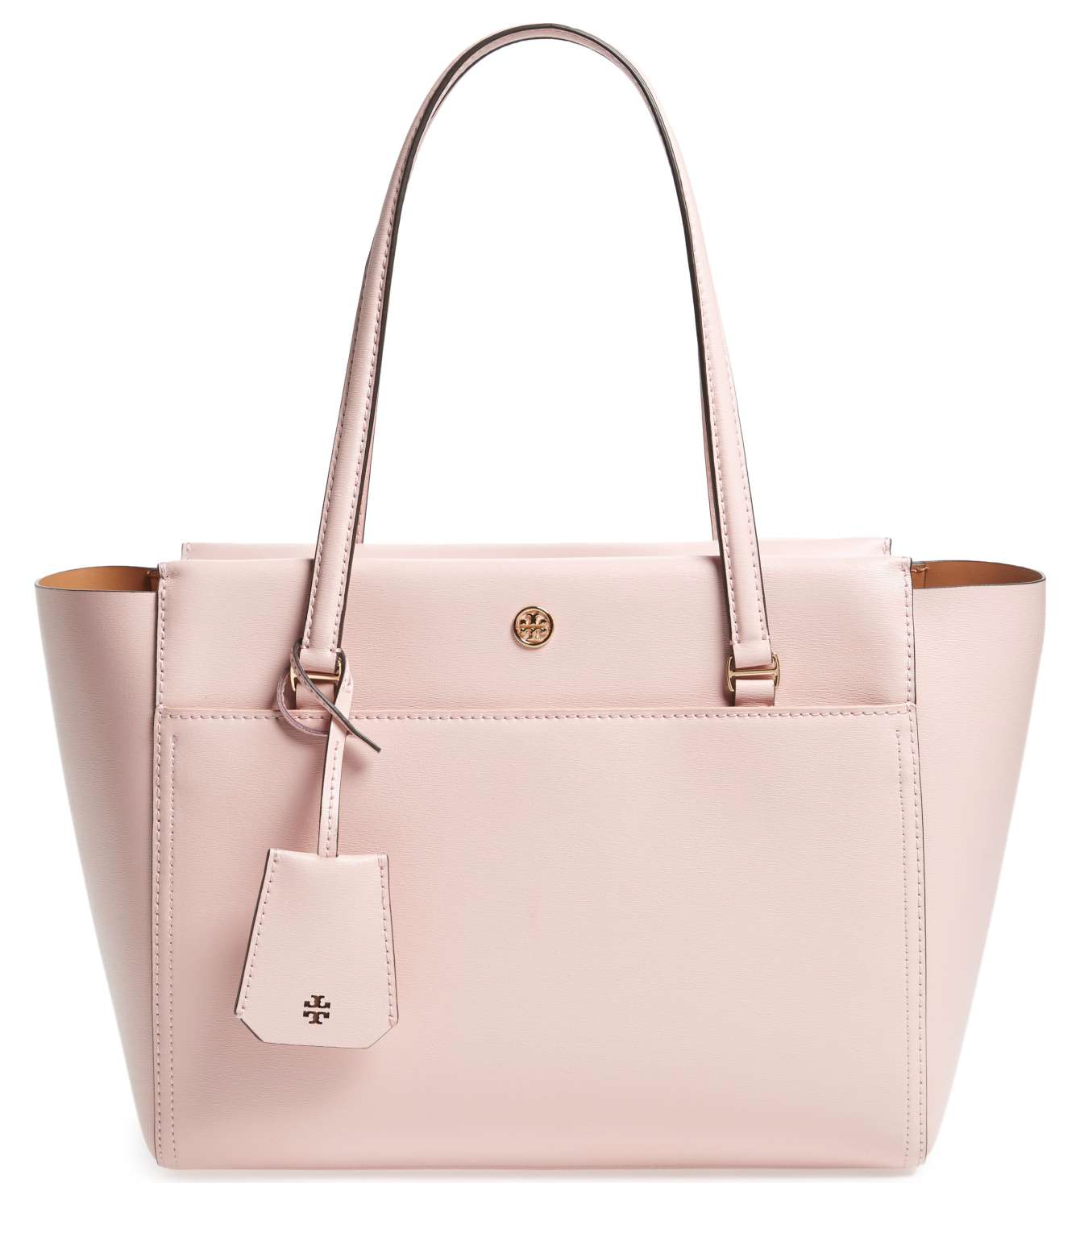 Breast Cancer Awareness Tote by Tori Burch 